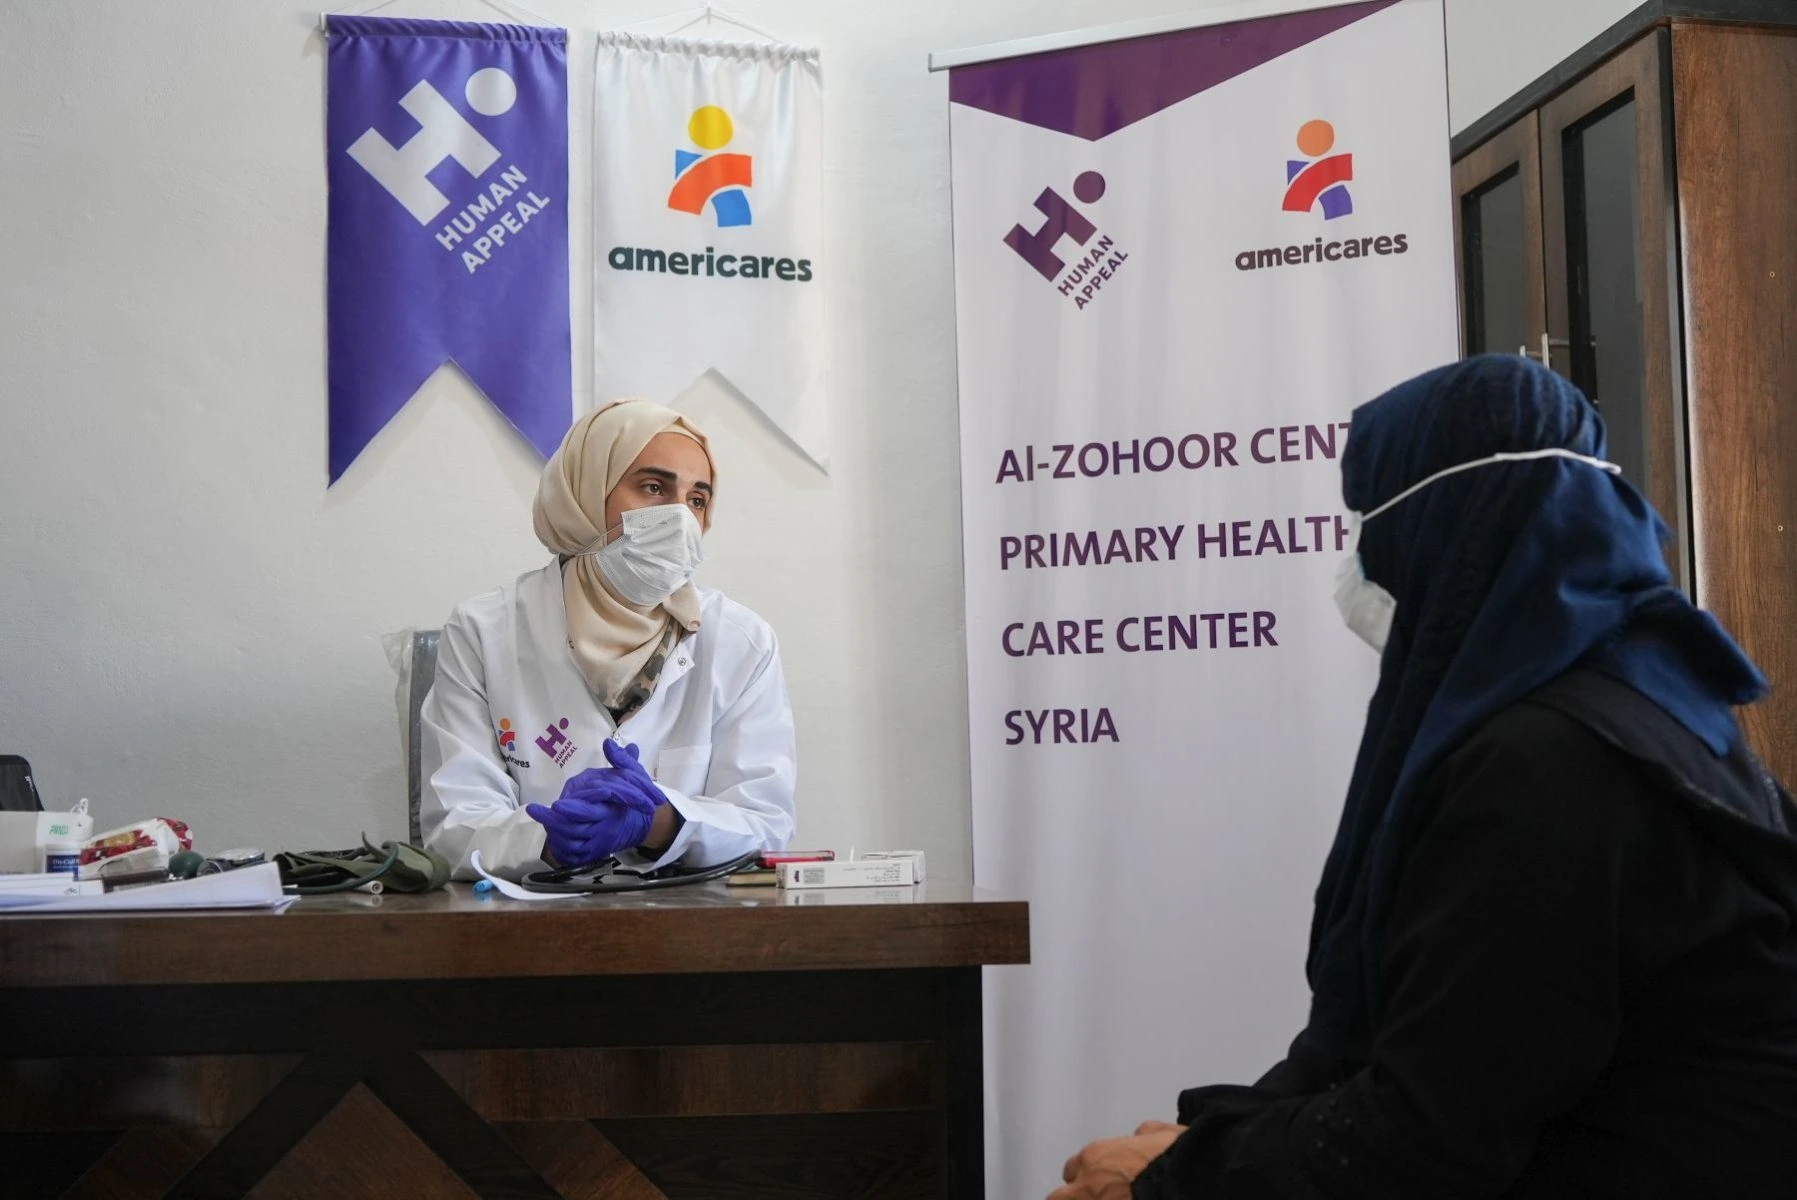 Health worker in mask, lab coat and hijab with gloves speaks with patient seated in mask and hijab. Human Appeal and Americares signage behind health worker